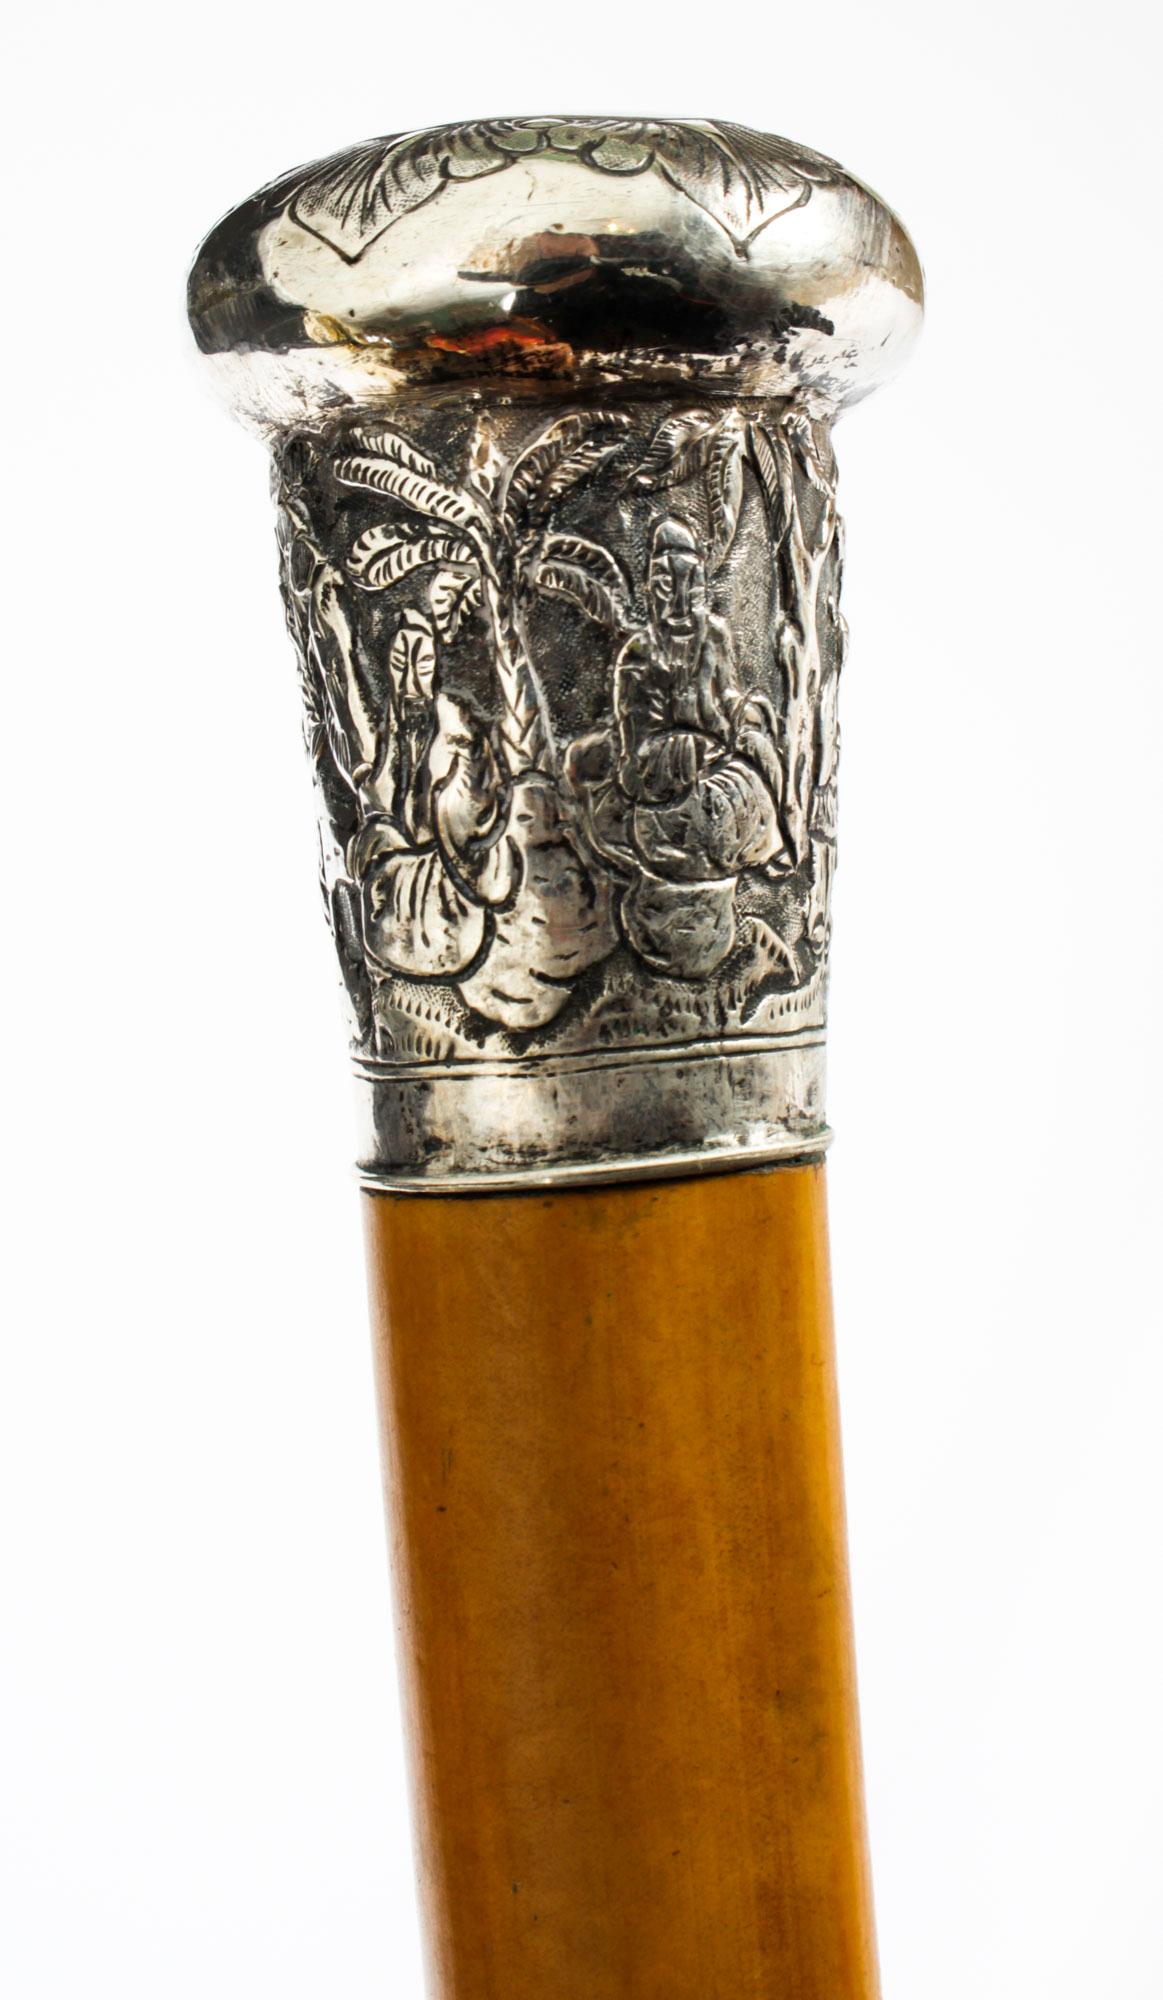 This is a beautiful antique gentleman's silver pommel and Malacca shaft Chinese walking stick, circa 1880 in date.

This decorative walking cane features an exquisite Chinese silver pommel decorated with exquisitely cast Chinese figures in a tree